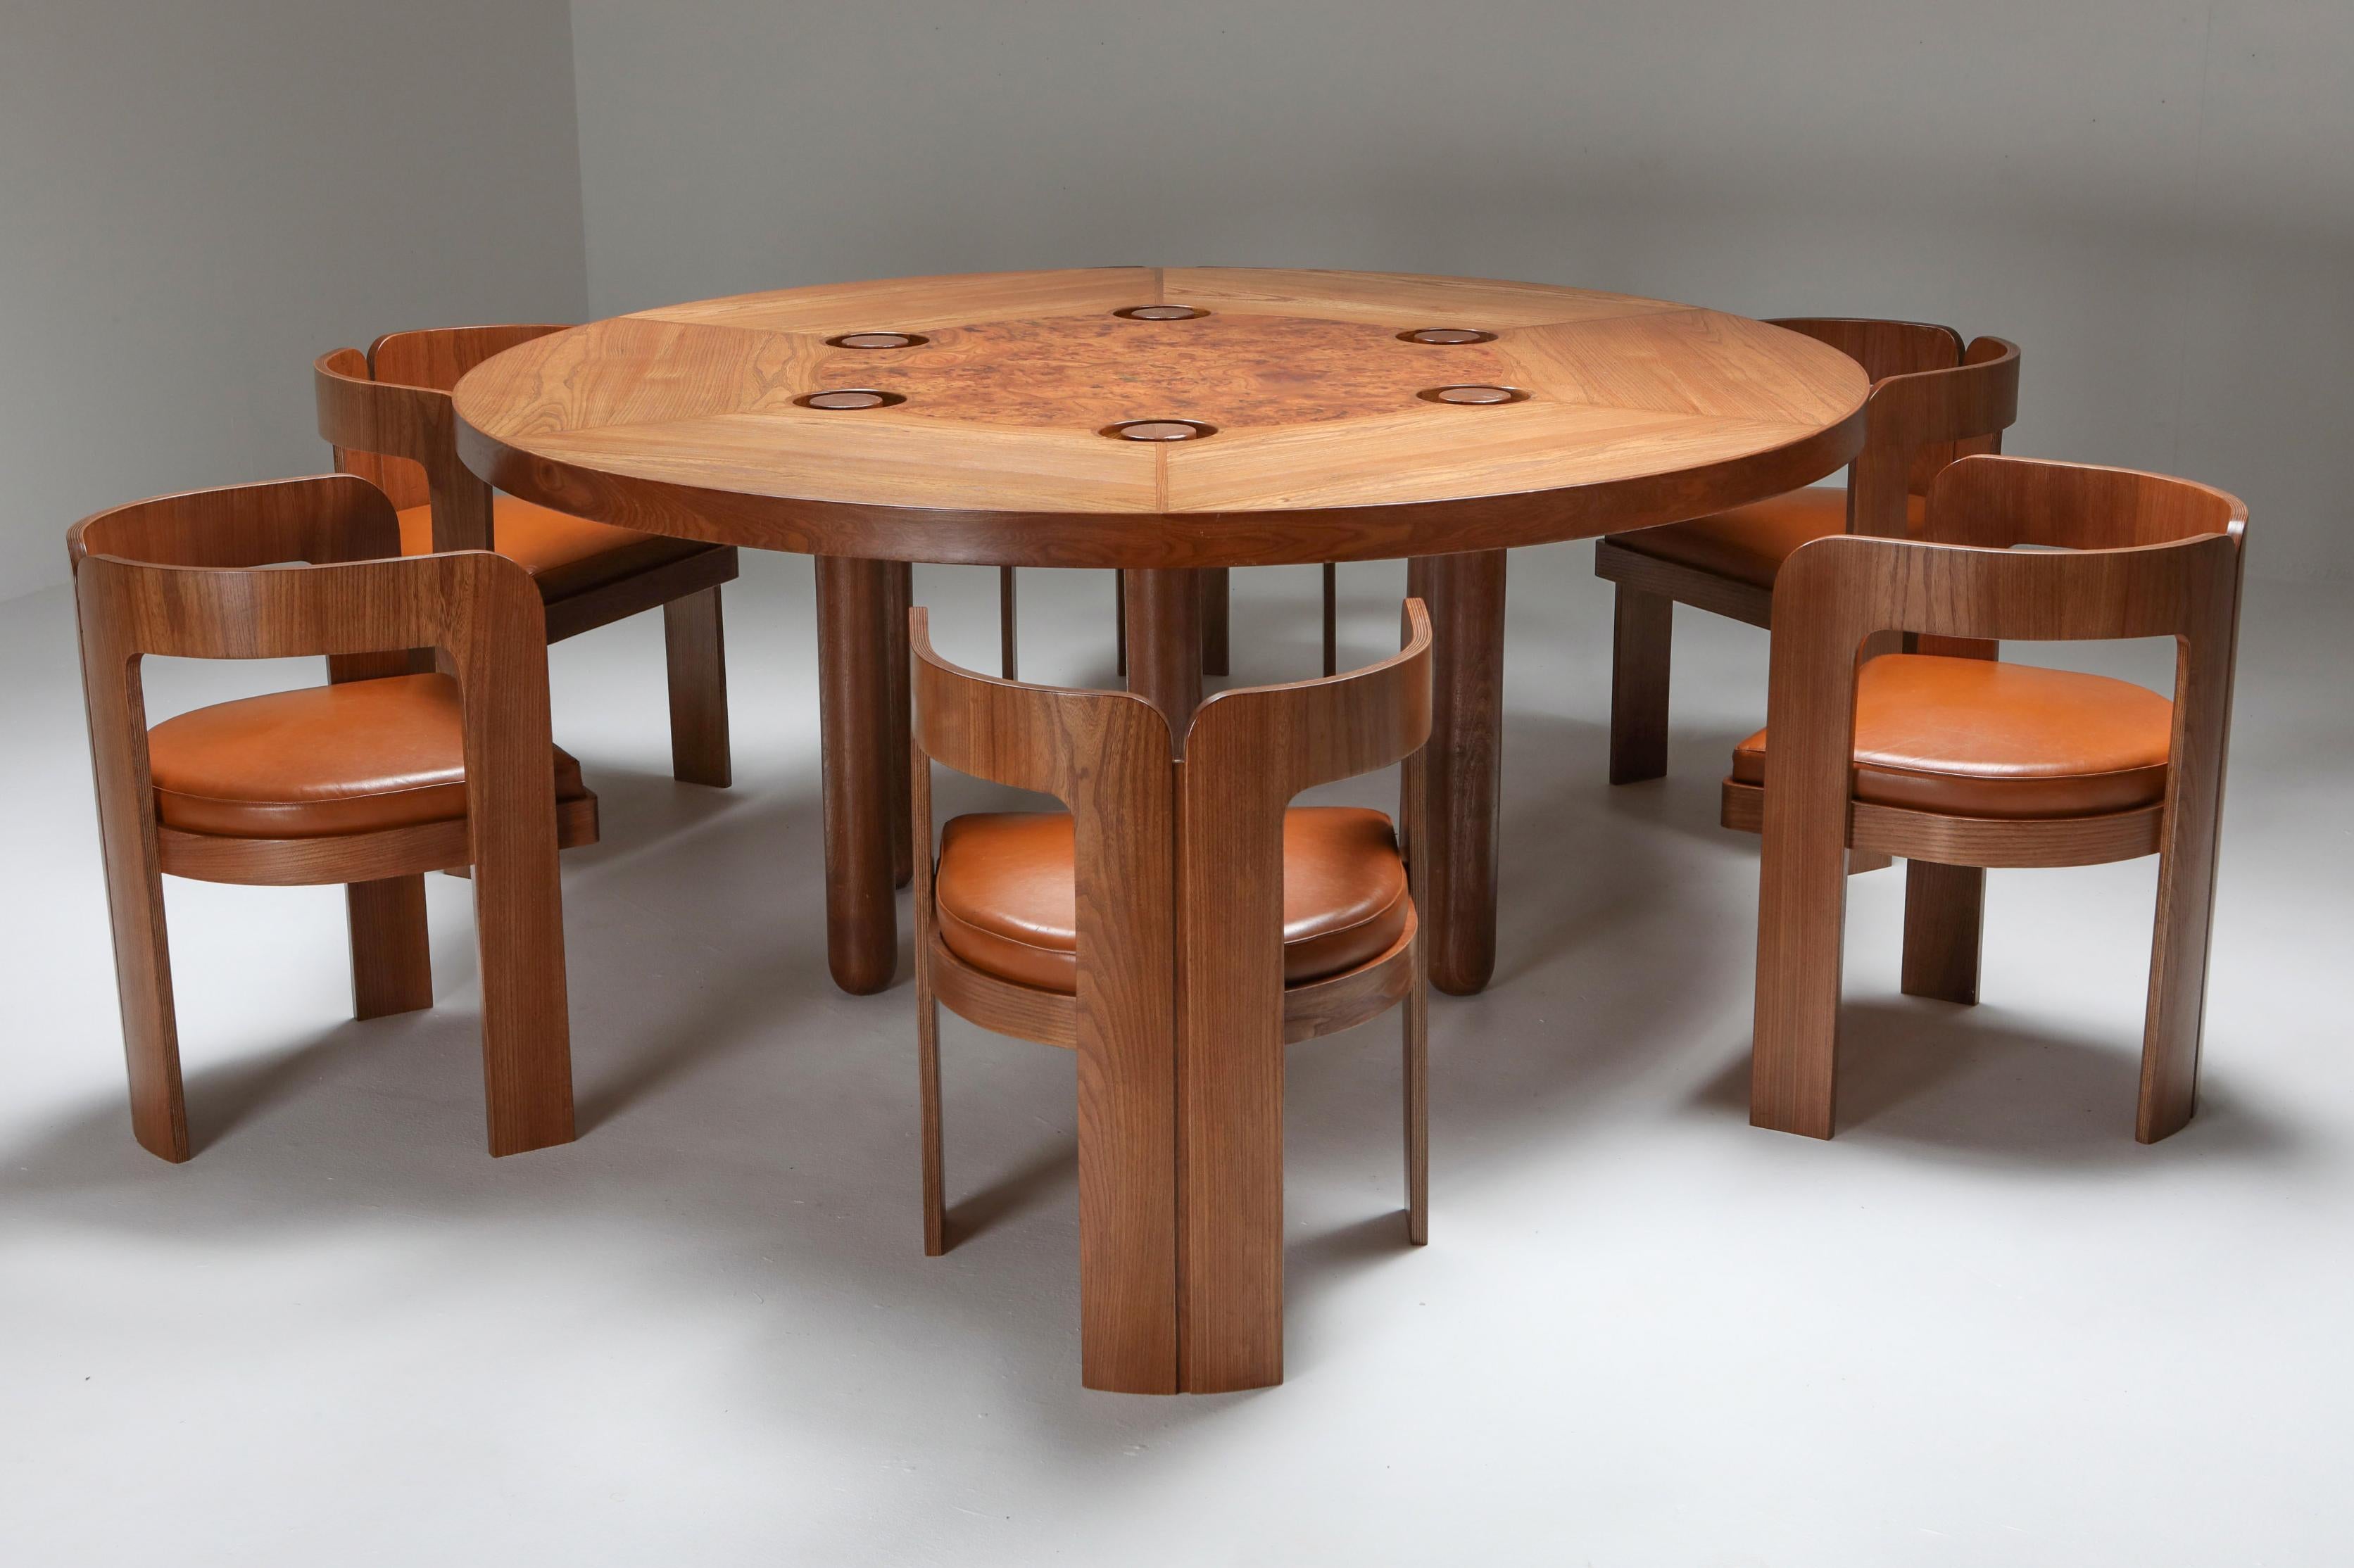 Italian design round dining table and armchairs by Marzio Cecchi, walnut, burl

The chairs fit perfectly underneath the tabletop.

Marzio Cecchi was interior designer, architect, furniture designer. Artist.
He made everything custom for his